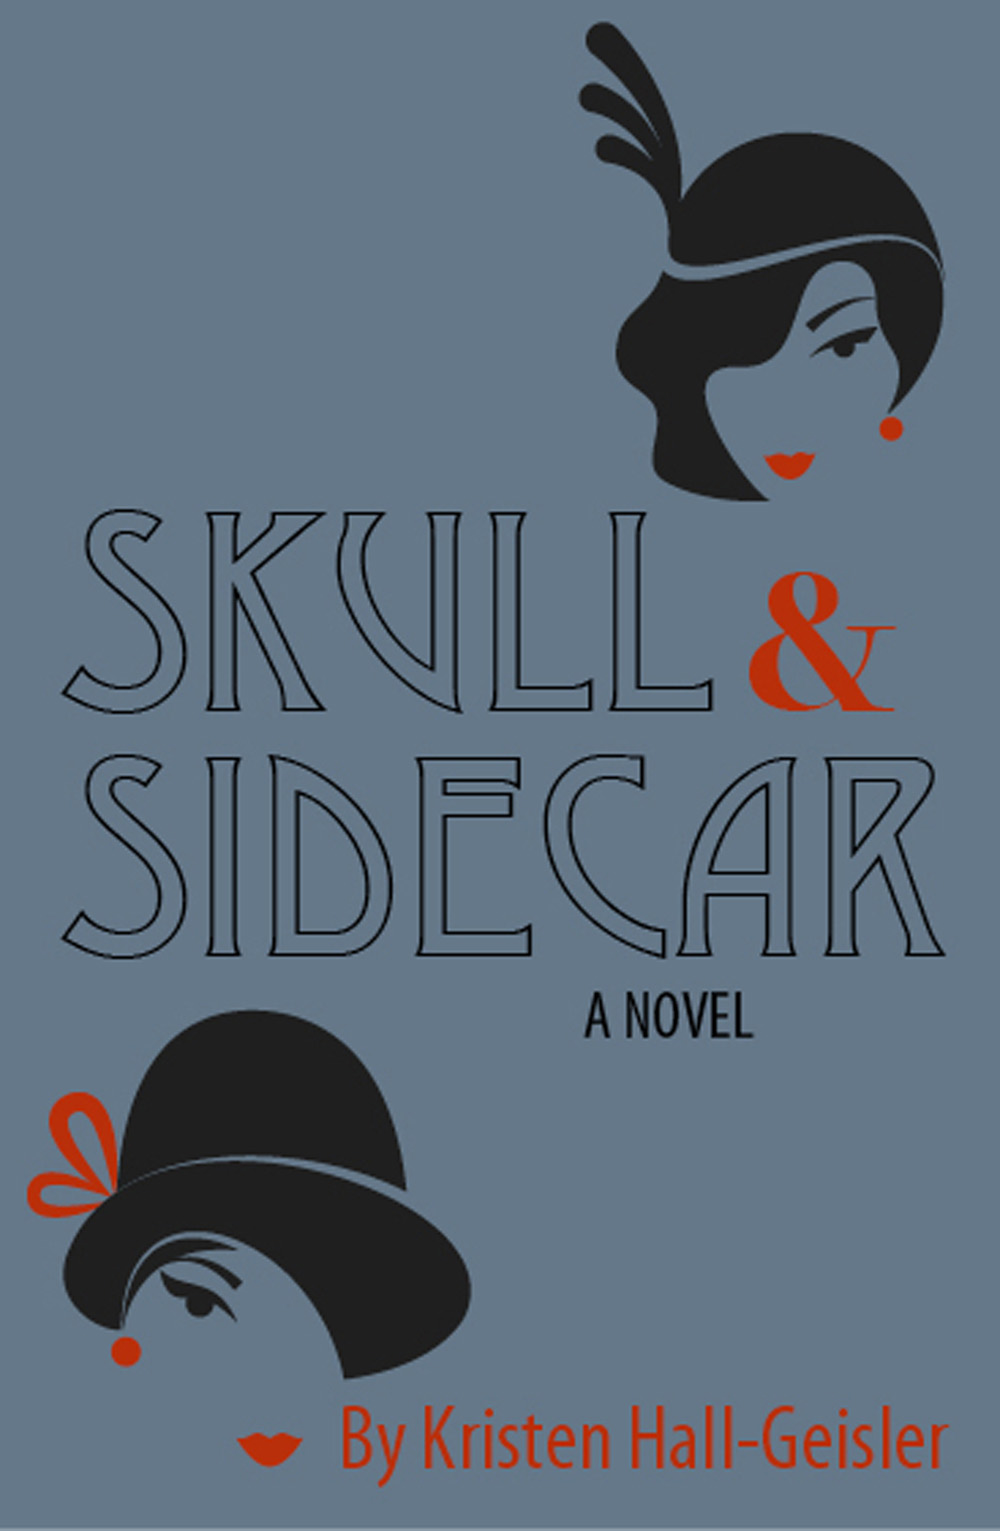 Skull and Sidecar: Where Did Those Characters Come From?